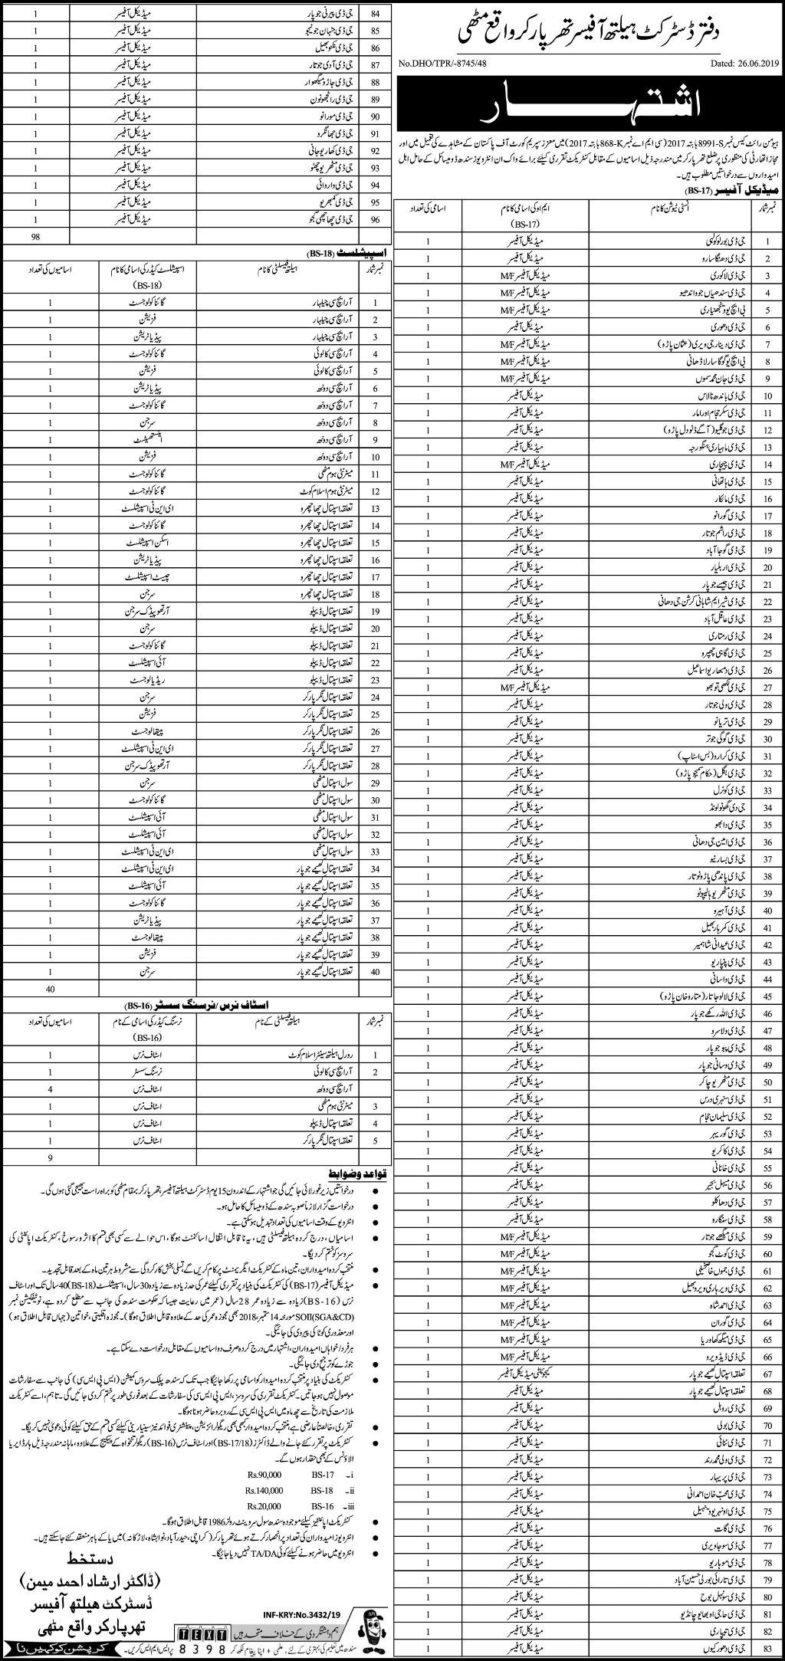 District Health Office Tharparkar Sindh Jobs 2019 for 147+ Staff Nurses, Medical Officers & Specialists